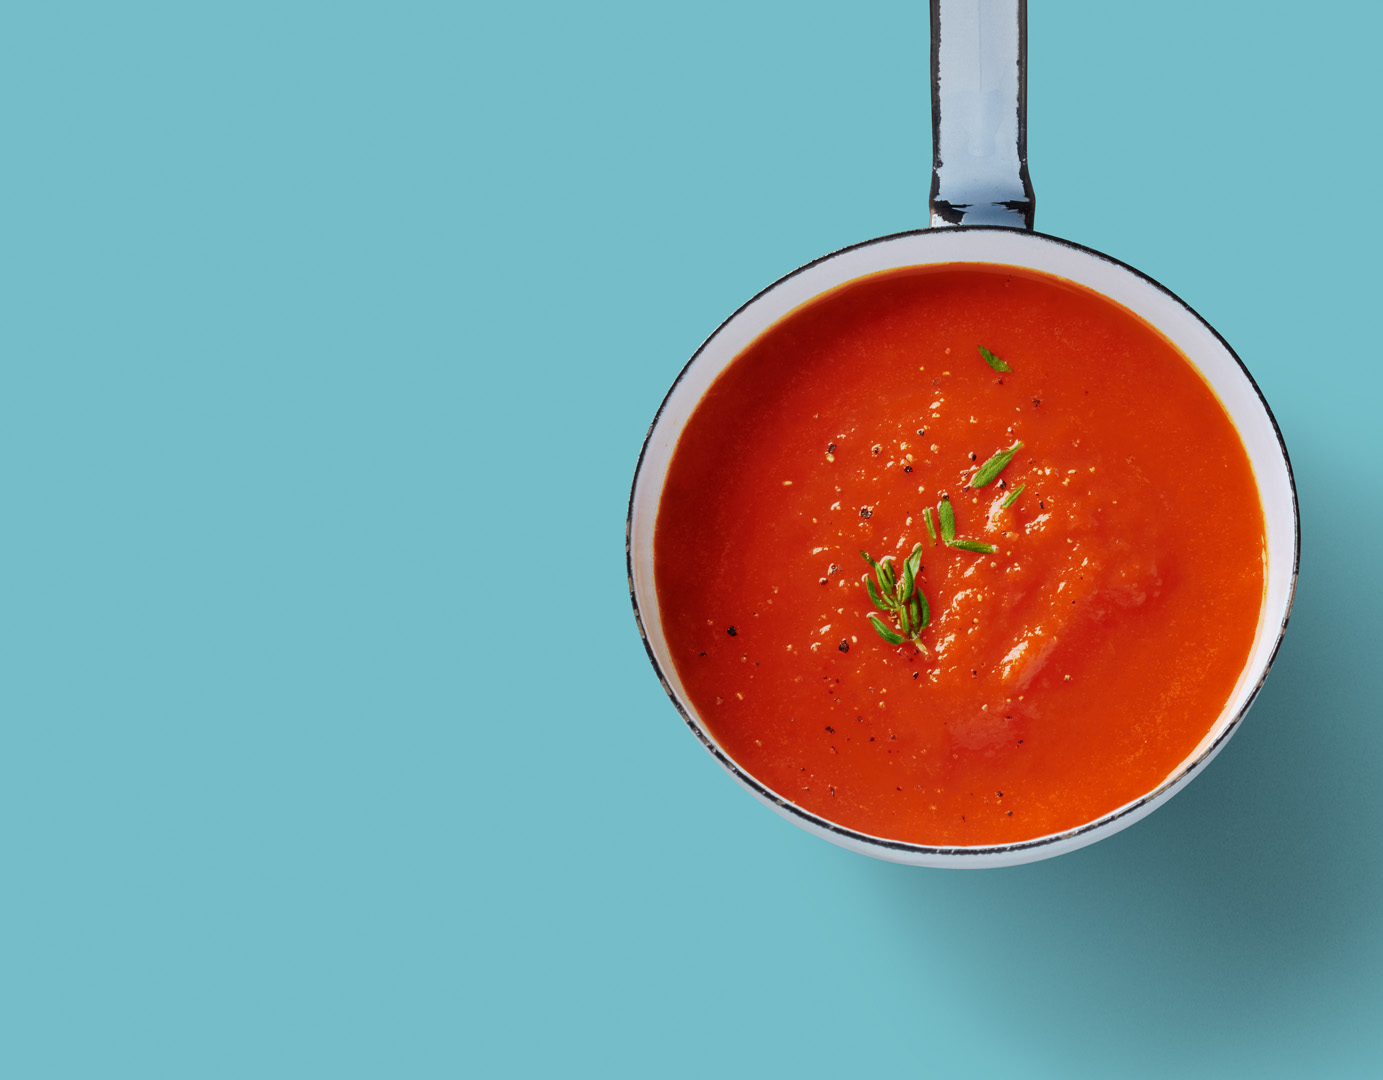 Floris Holtland - packaging photography - meal - red soup